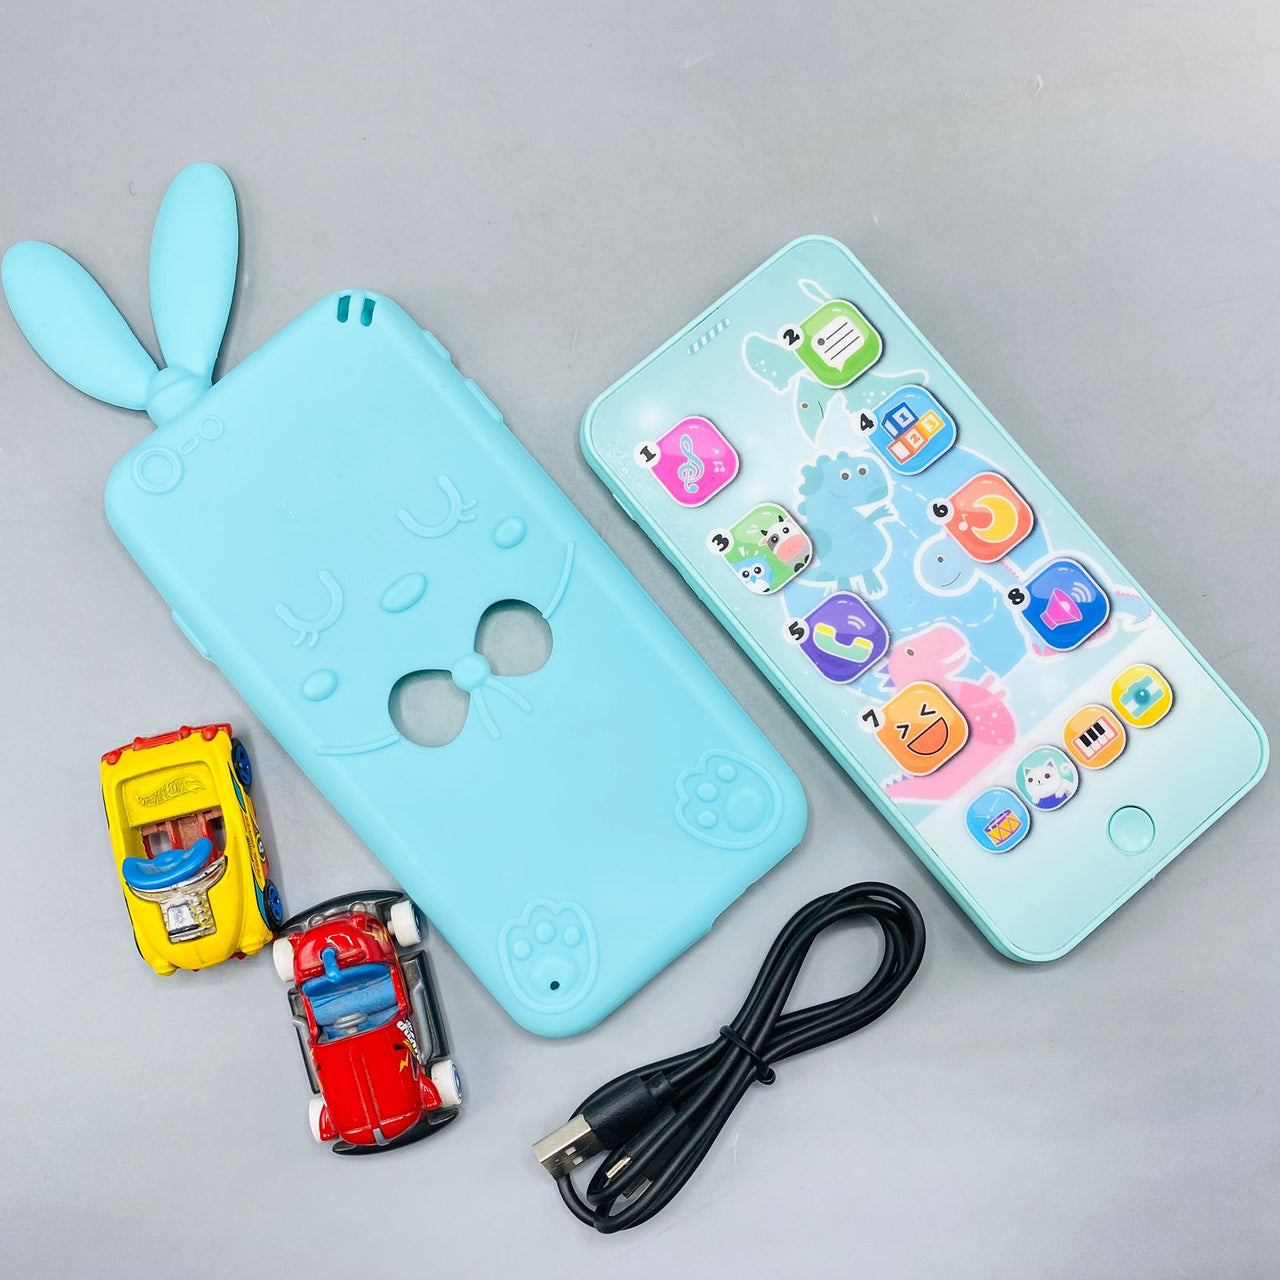 aiyingle smart rabbit phone toy for kids